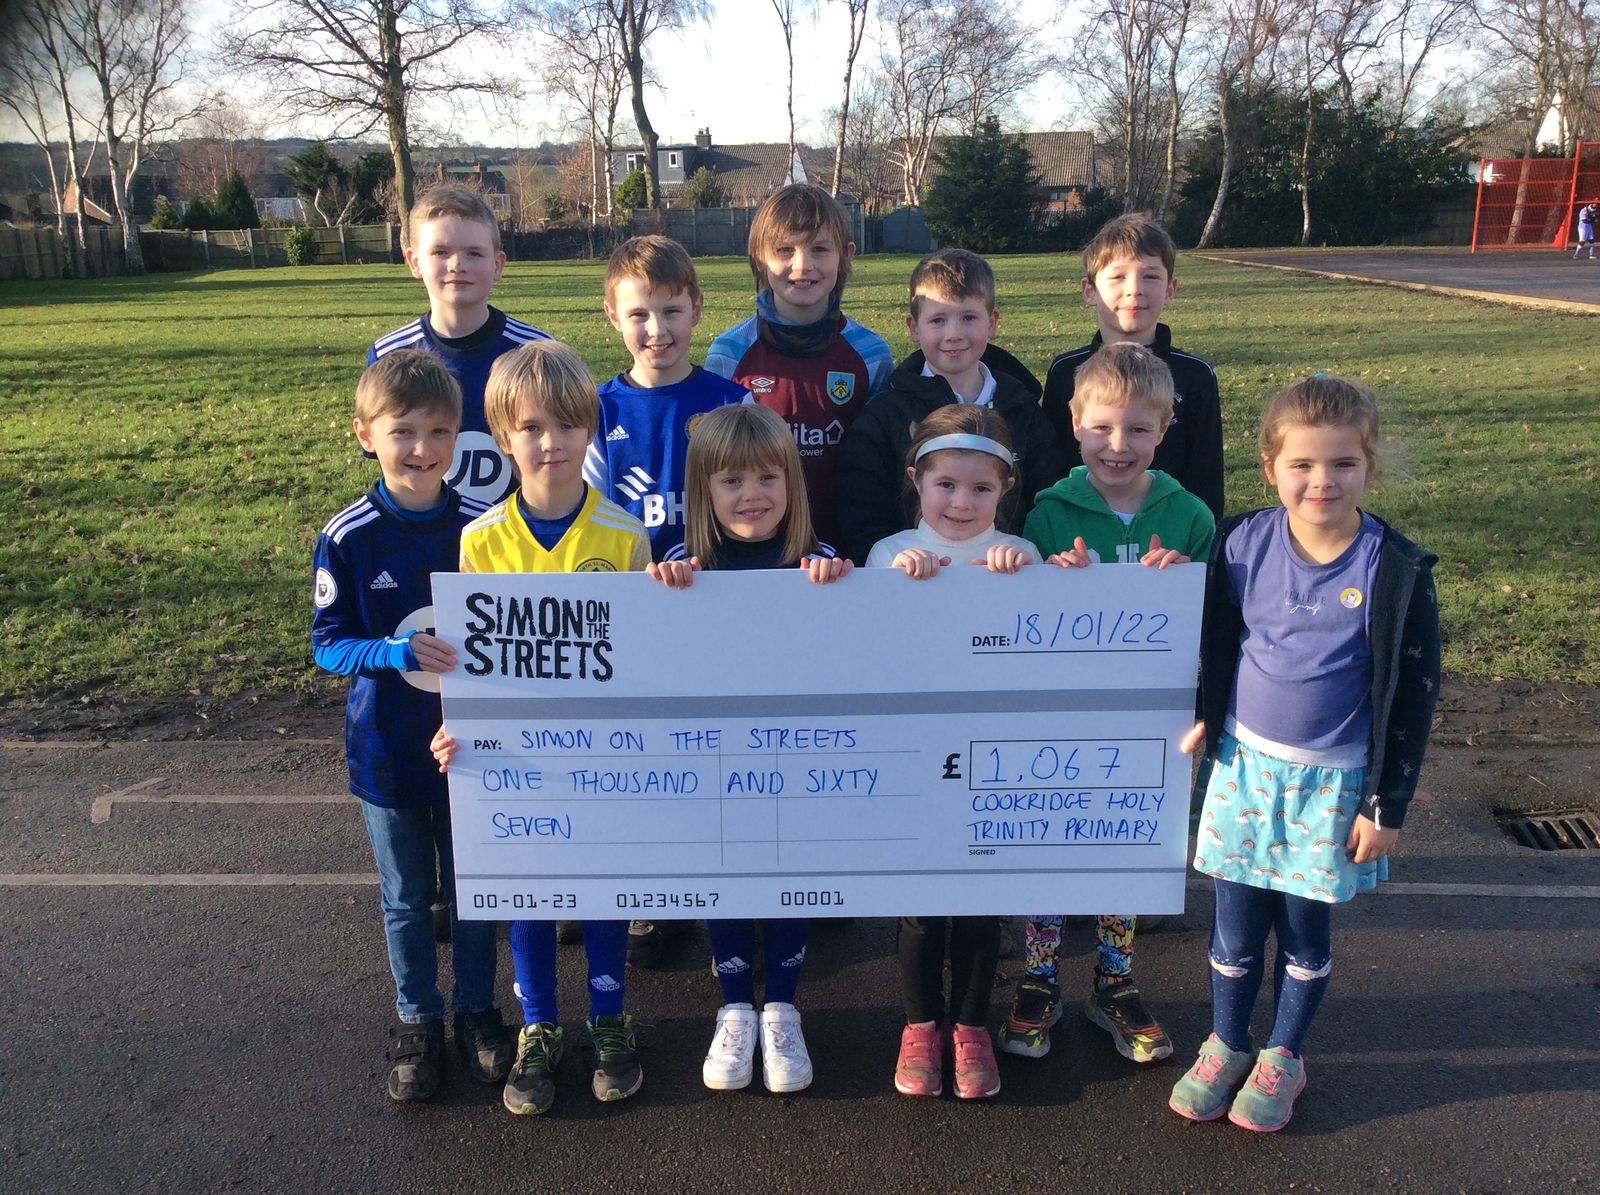 Children raise over £10,000 to support West Yorkshire’s homeless